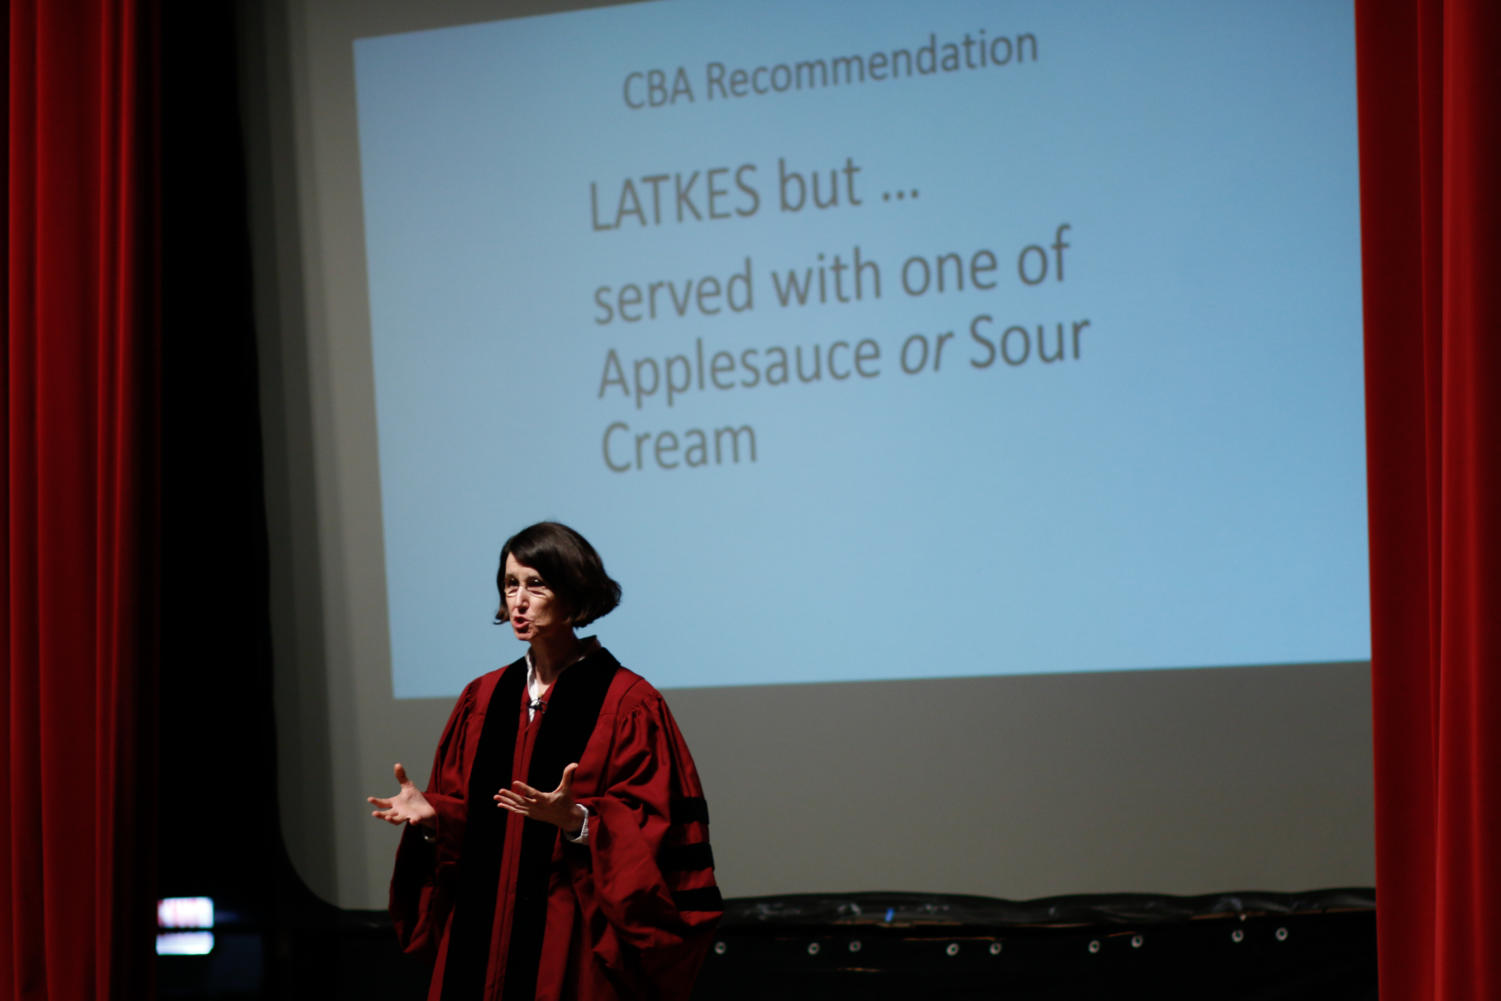 Associate Professor of Computer Science Anne Rogers draws on her roles as computer scientist, administrator, and educator, to speak on behalf of the latke in what ended up a singularly one-sided debate.